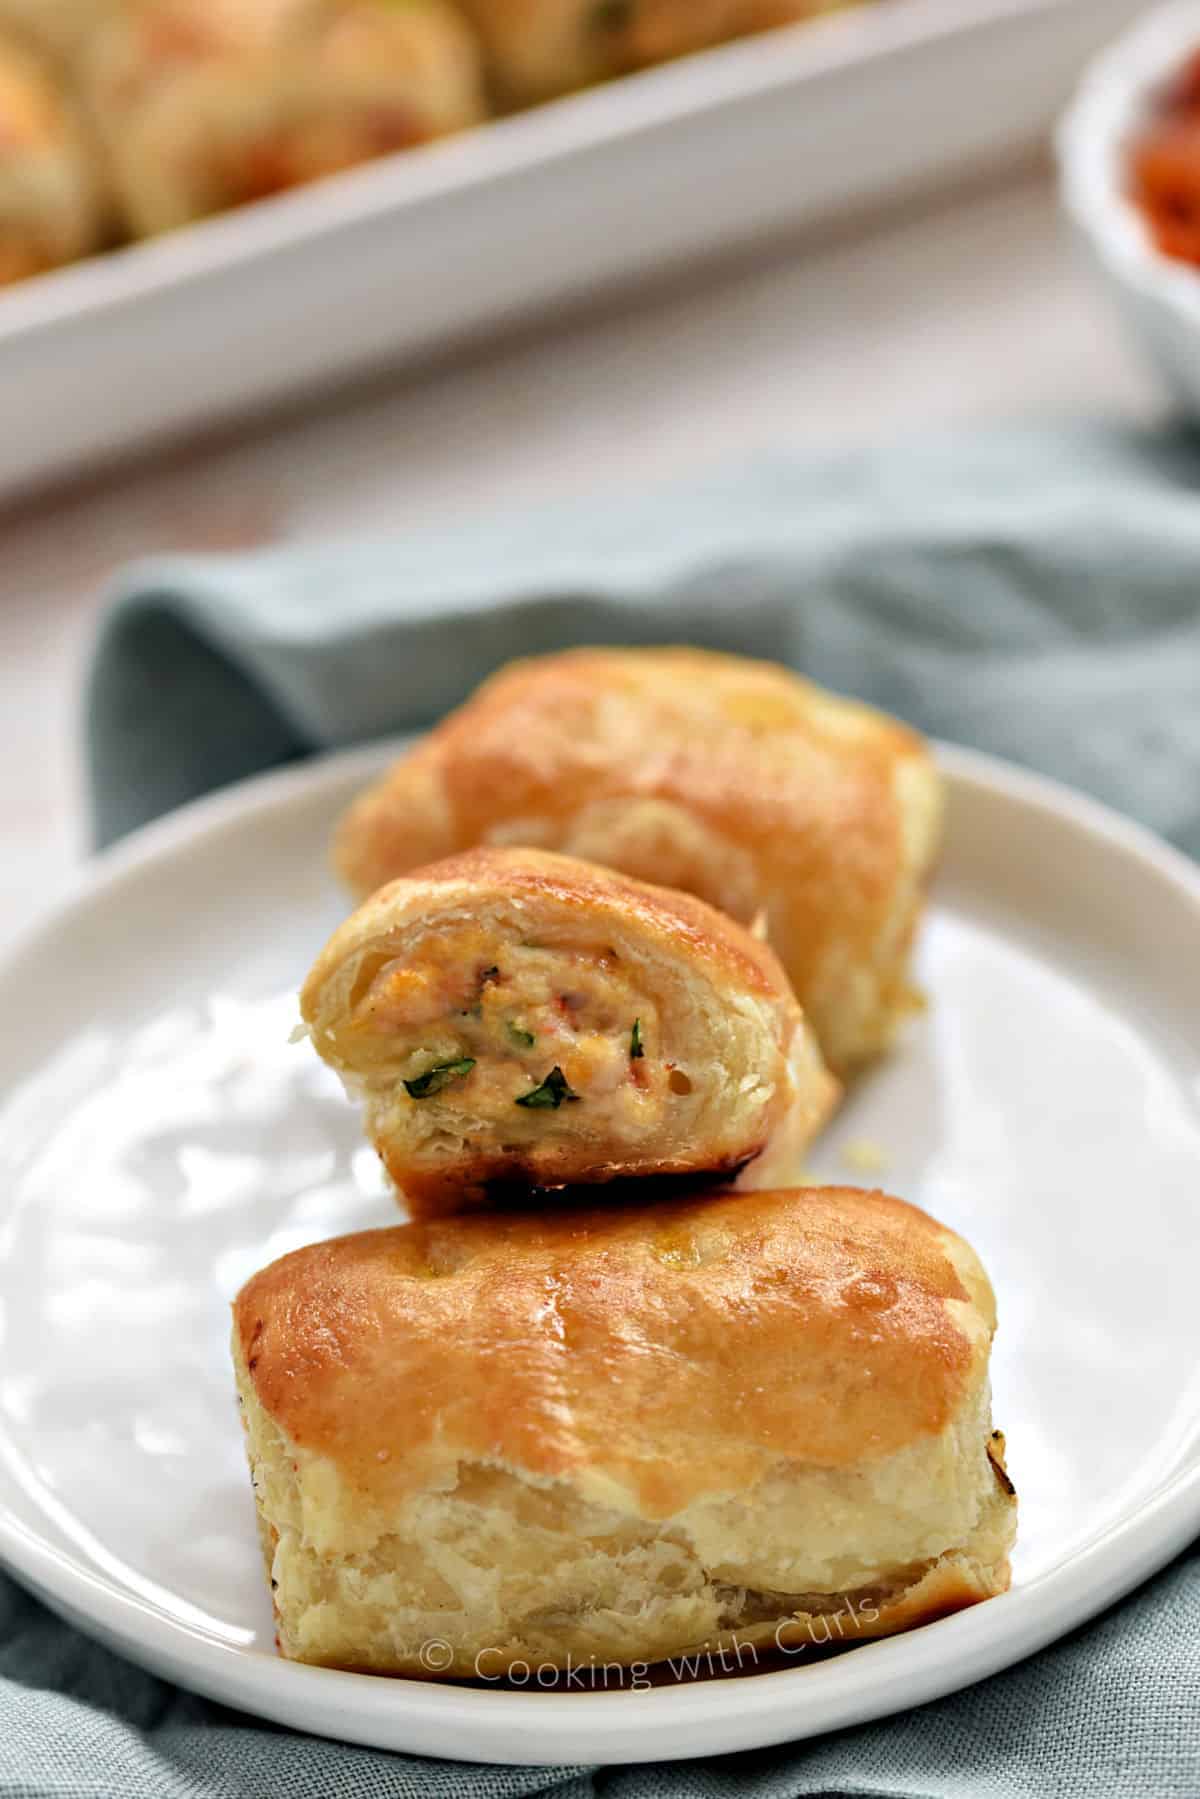 Three chicken sausage rolls stacked on a small plate to show the filling.